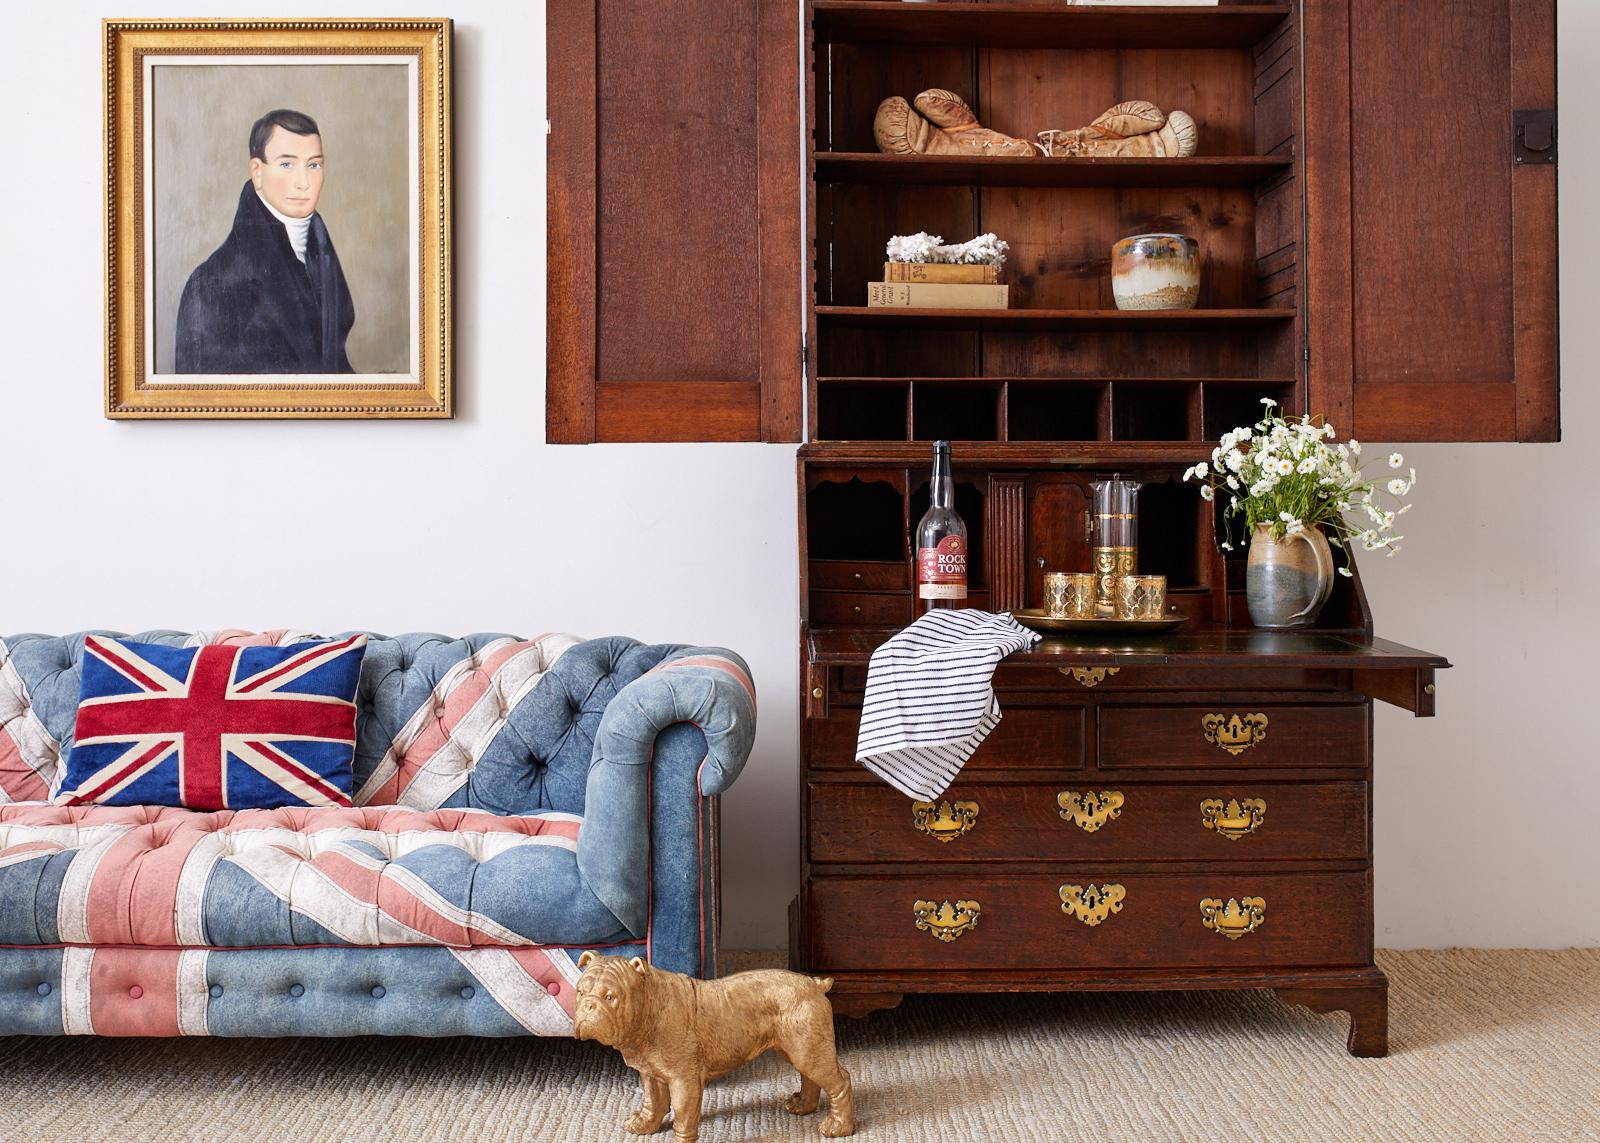 Fabulous tufted chesterfield settee designed by Timothy Oulton. Features a cotton denim fabric upholstery pieced together in a union jack pattern design. Beautifully faded and aged patina with excellent joinery and craftsmanship. Made with a low 25